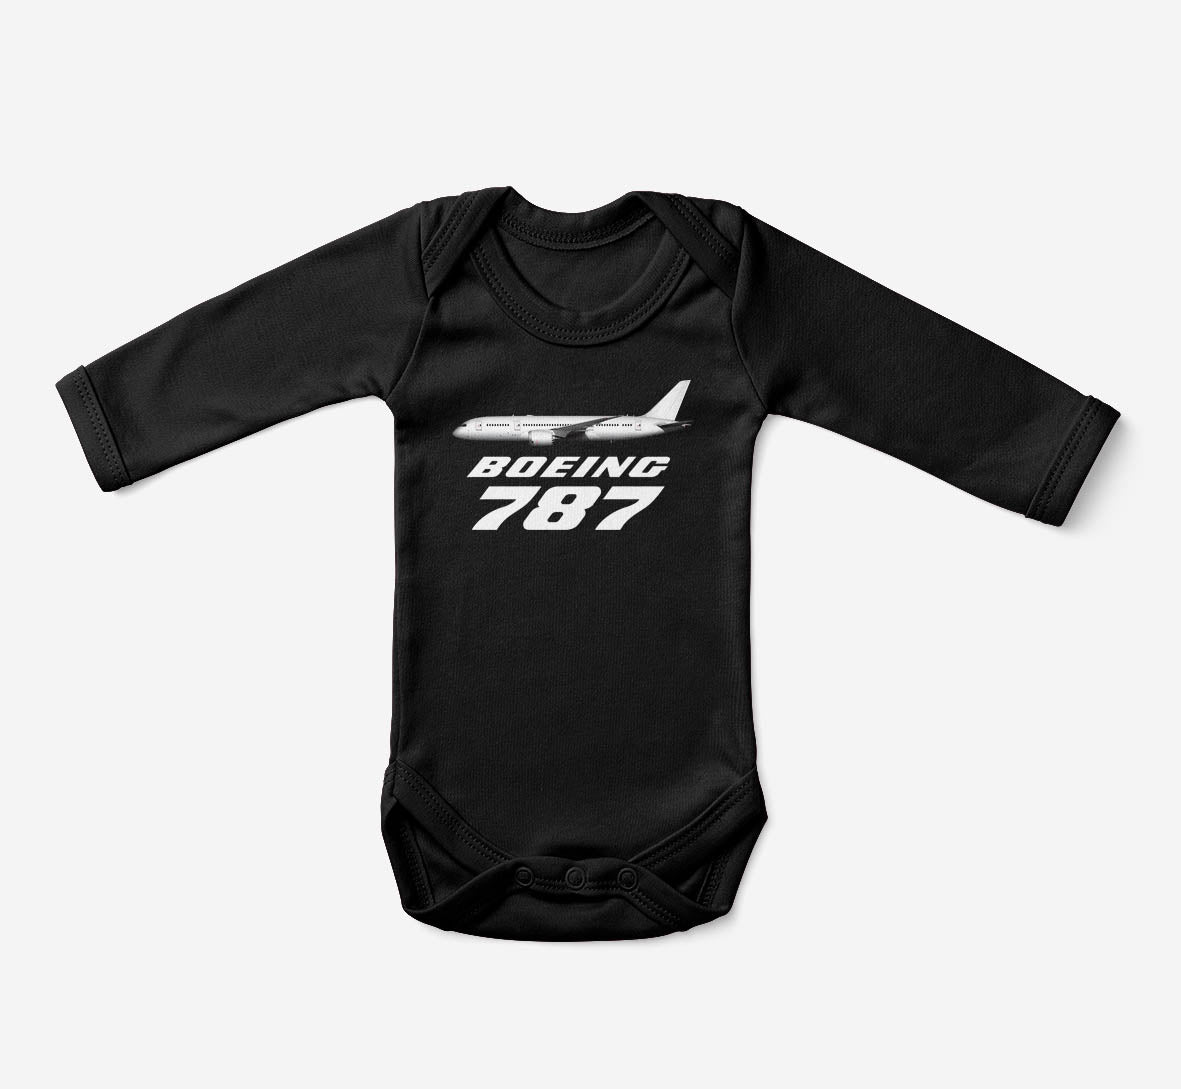 The Boeing 787 Designed Baby Bodysuits